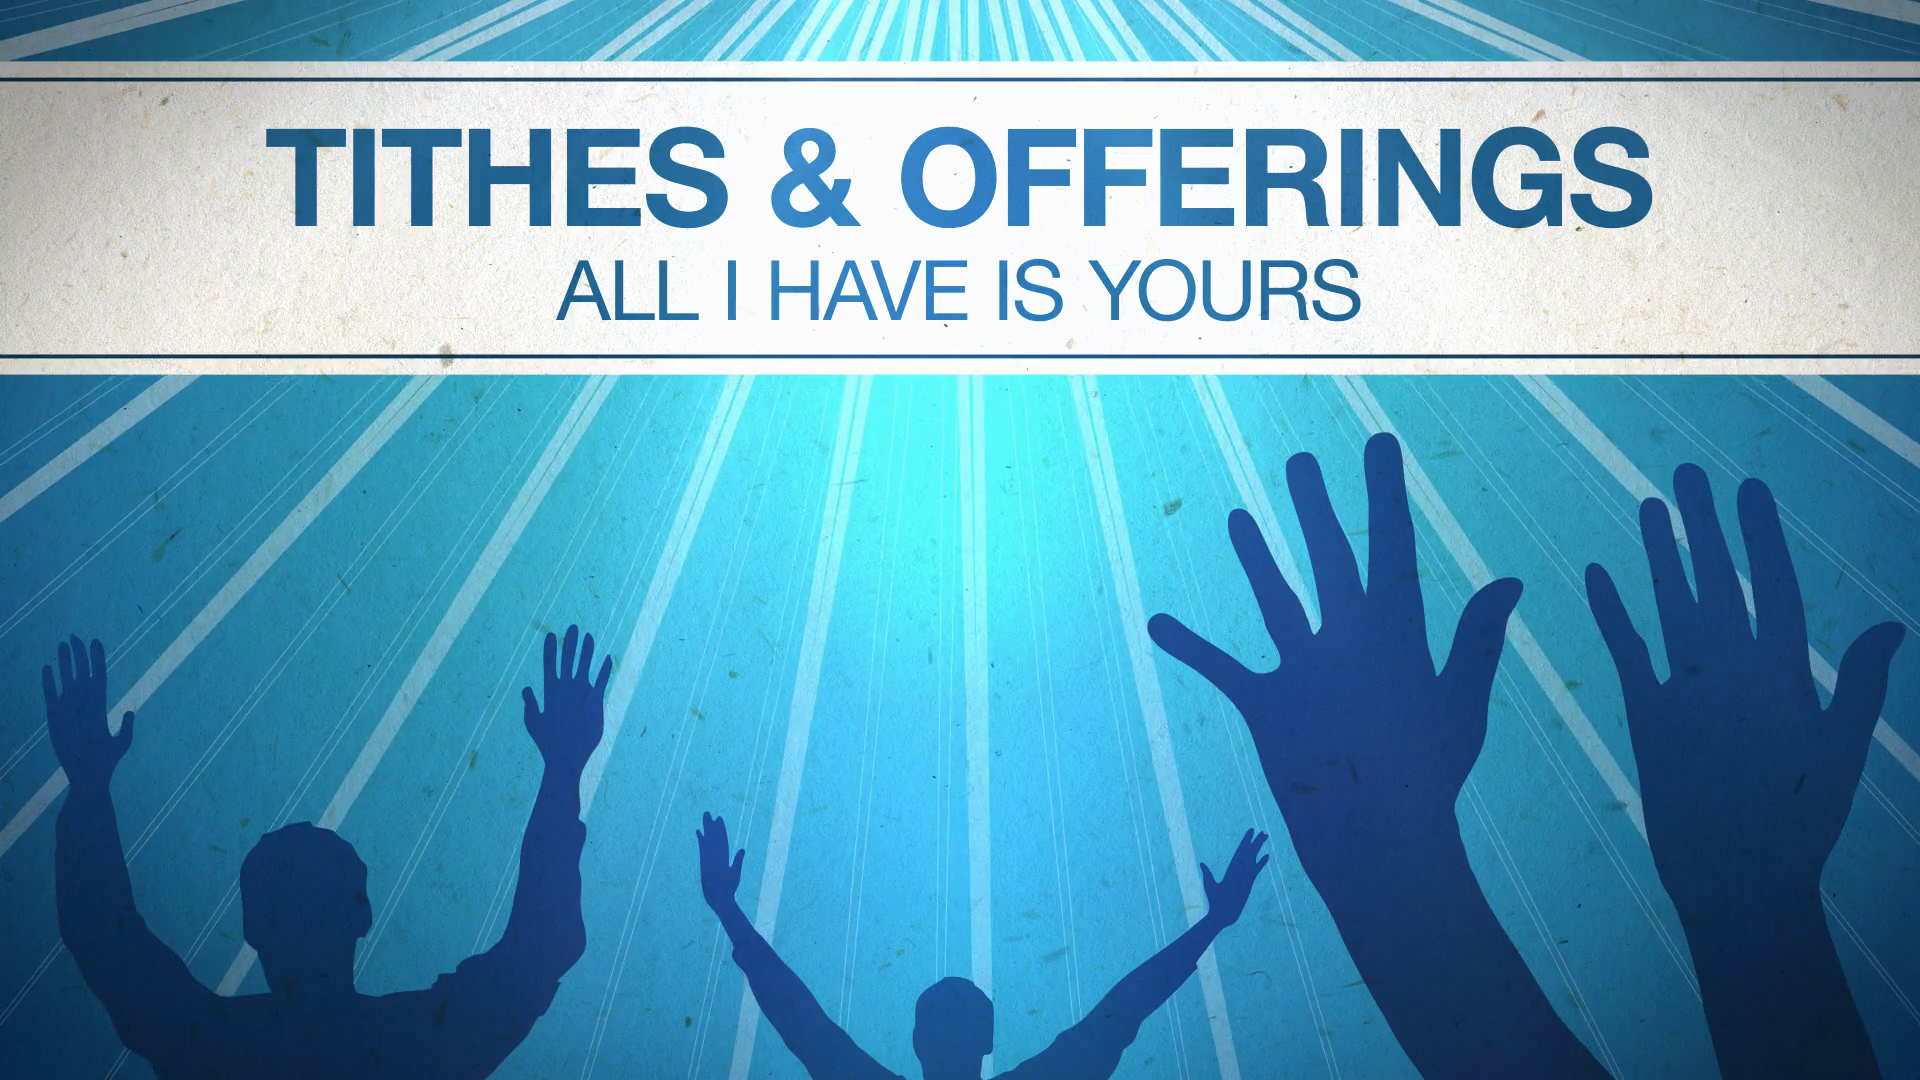 Tithes And Offerings Motion Background 00:28 SBV 300185929